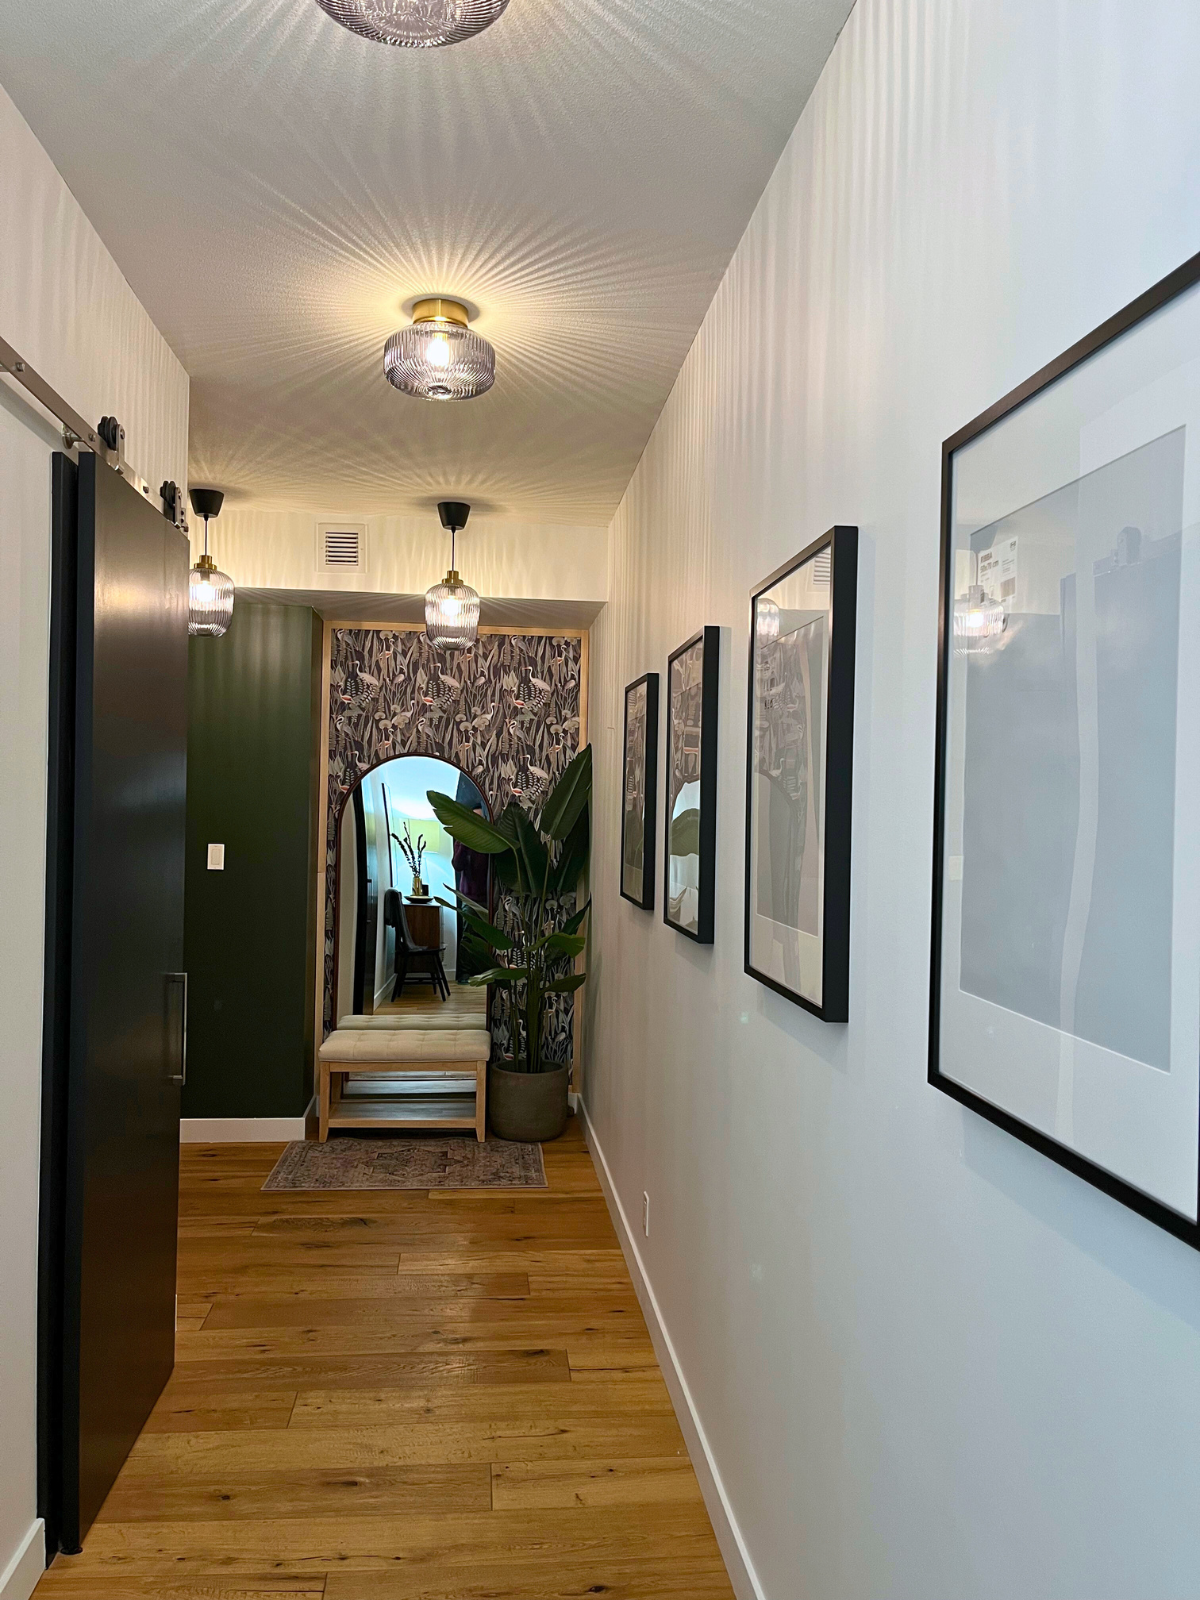 hallway with gallery wall, white painted walls, black barn doors, existing hardwood flooring and flush mount decorative light fixtures